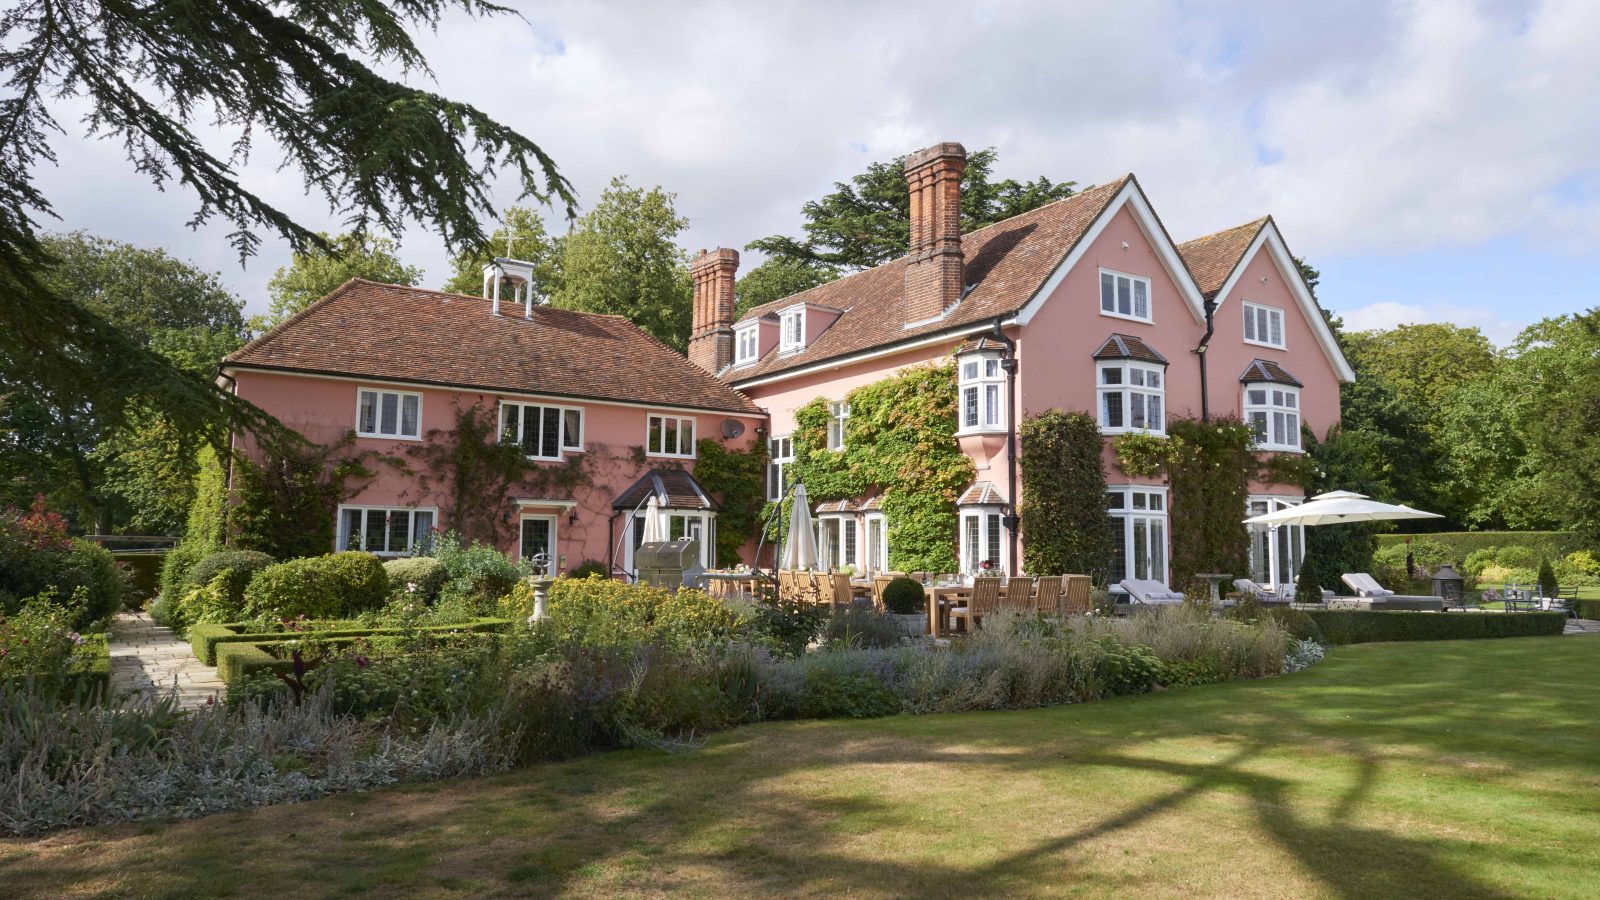 Suffolk Mansion - kate & tom's Large Holiday Homes